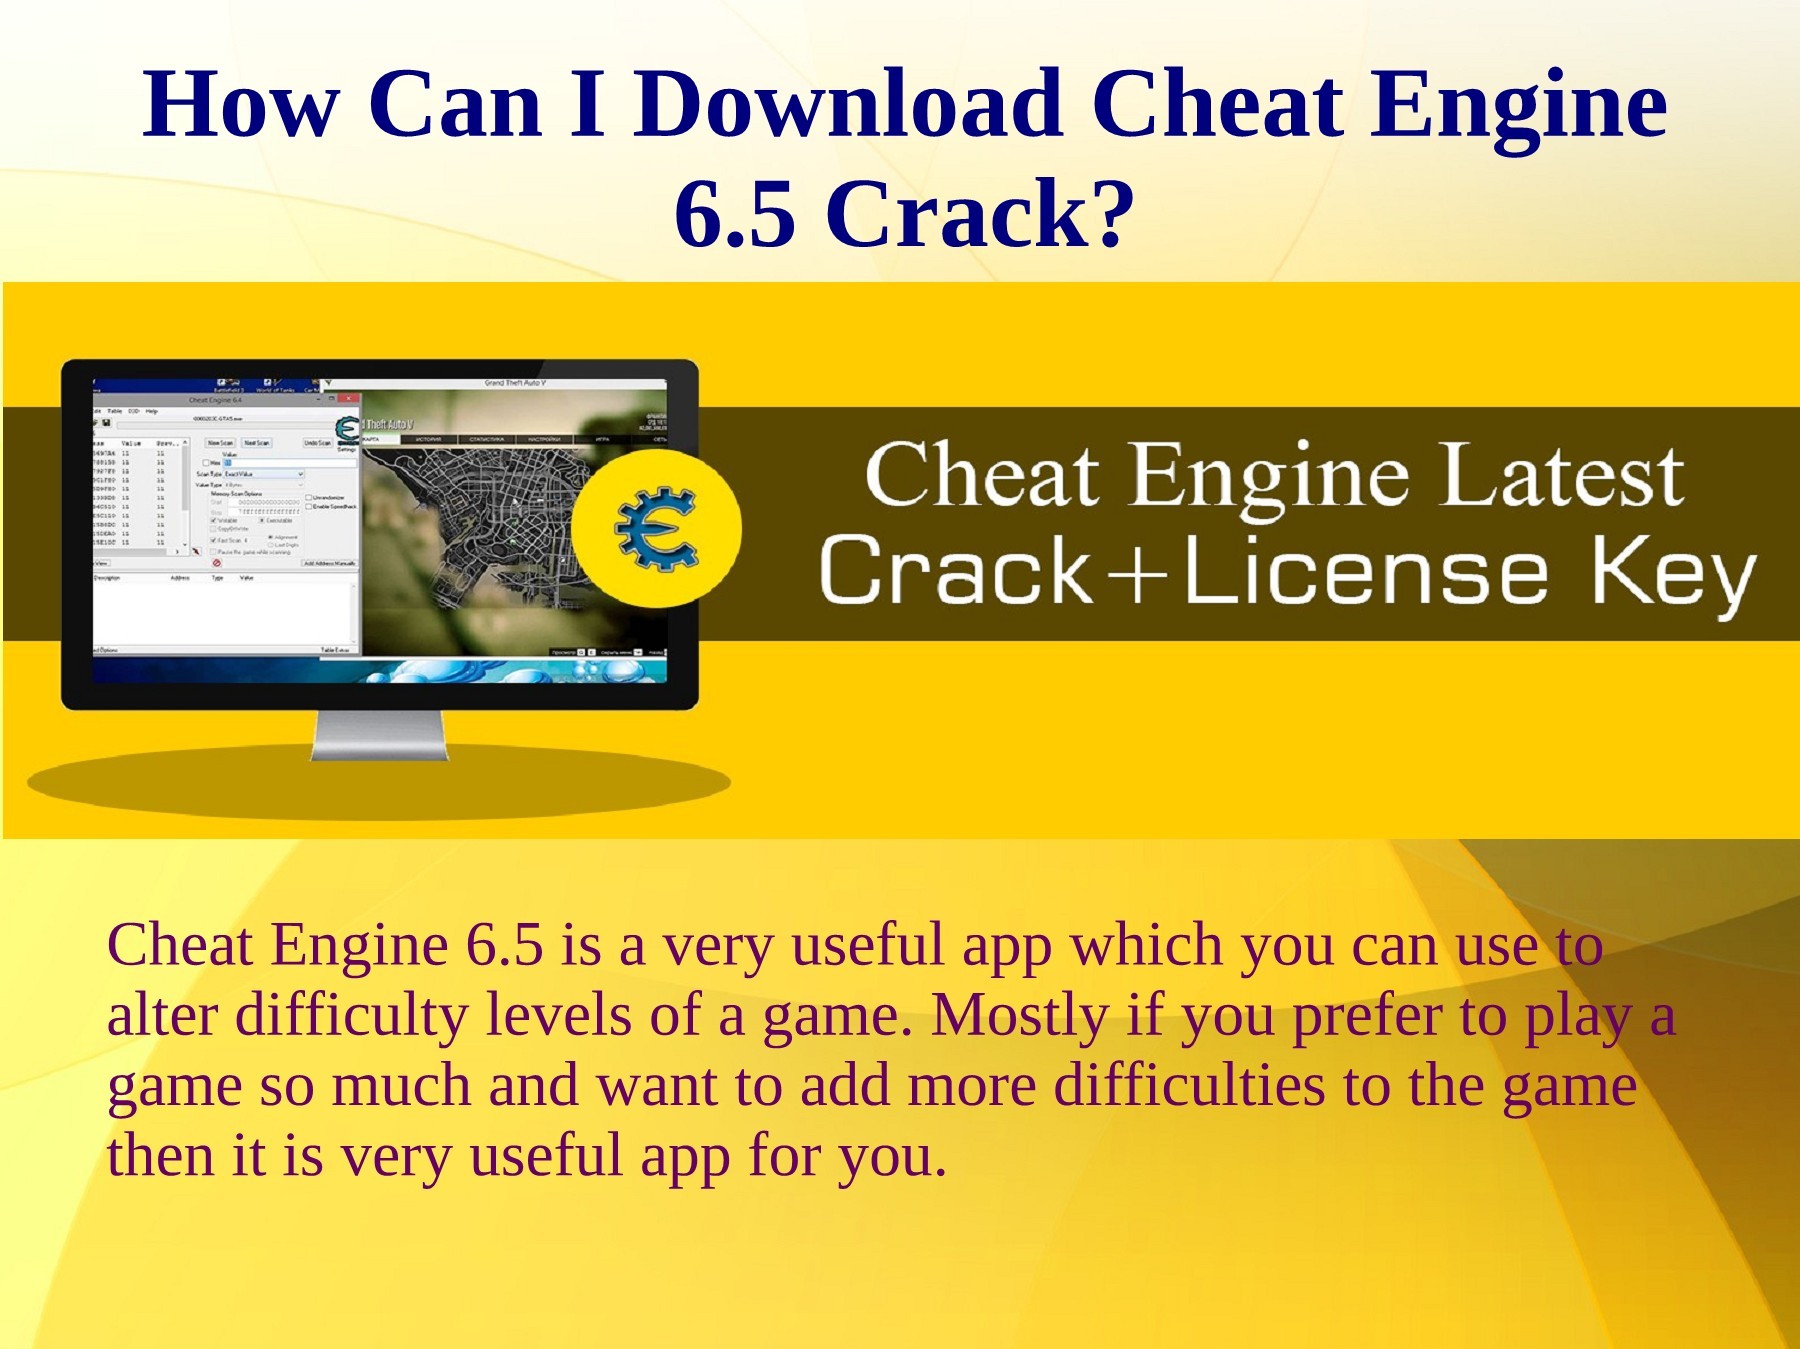 how to use cheat engine 6.6 dragon city